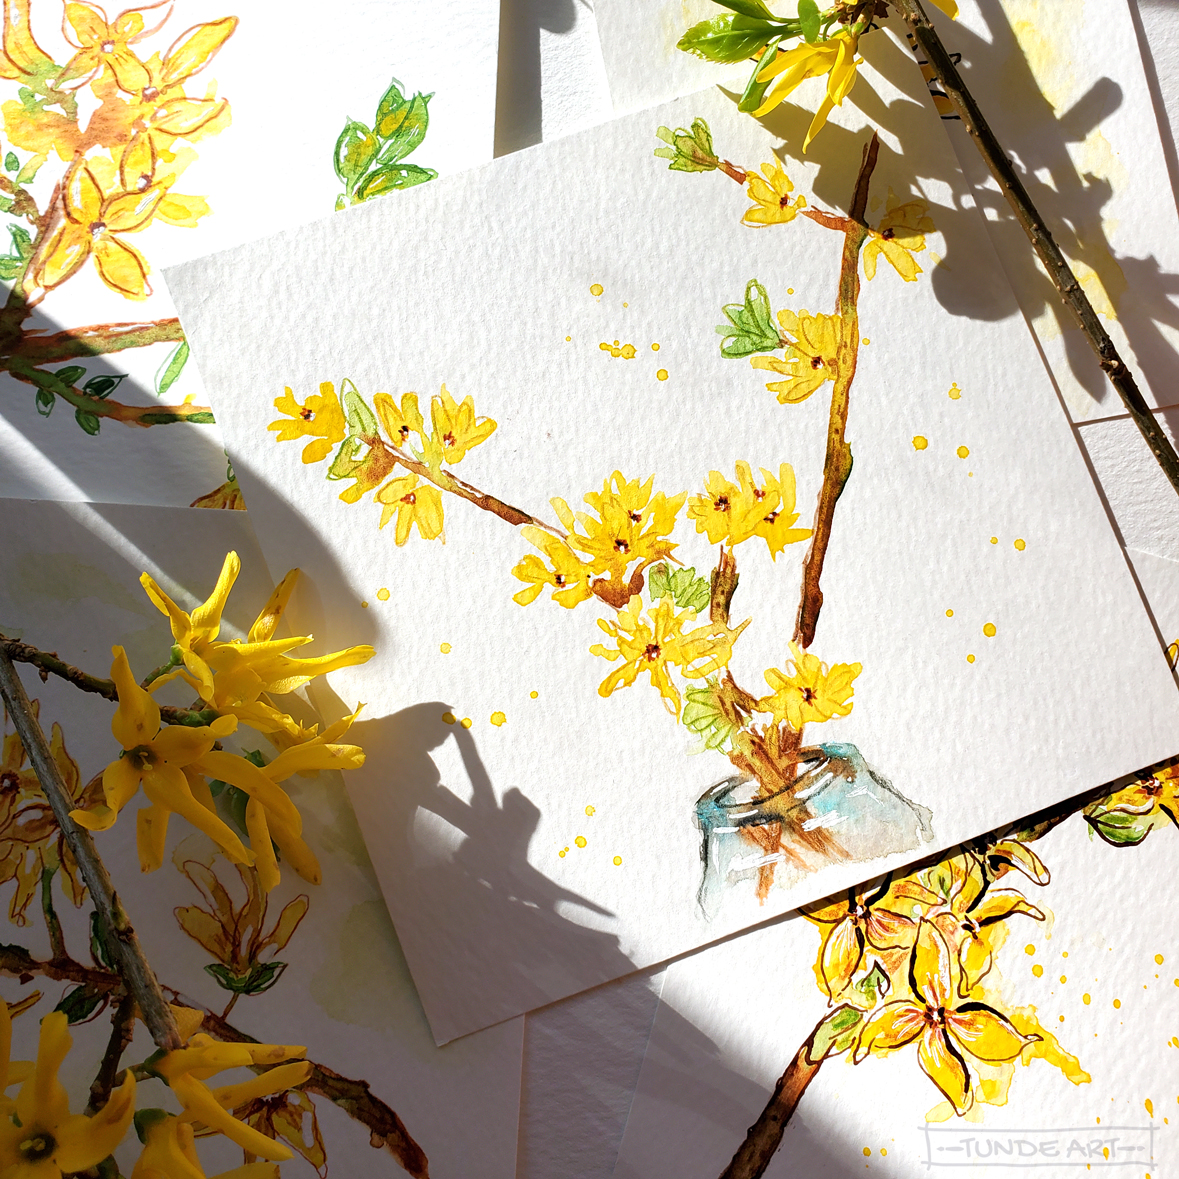 Did you know that forsythias bloom on the previous year's growth? The best time to prune them is immediately after flowering, so around this time of the year. 👩‍🌾✂️🌼

#forsythia #pruning #gardening #watercolour #painting #tundeart #art #sunshine #spring